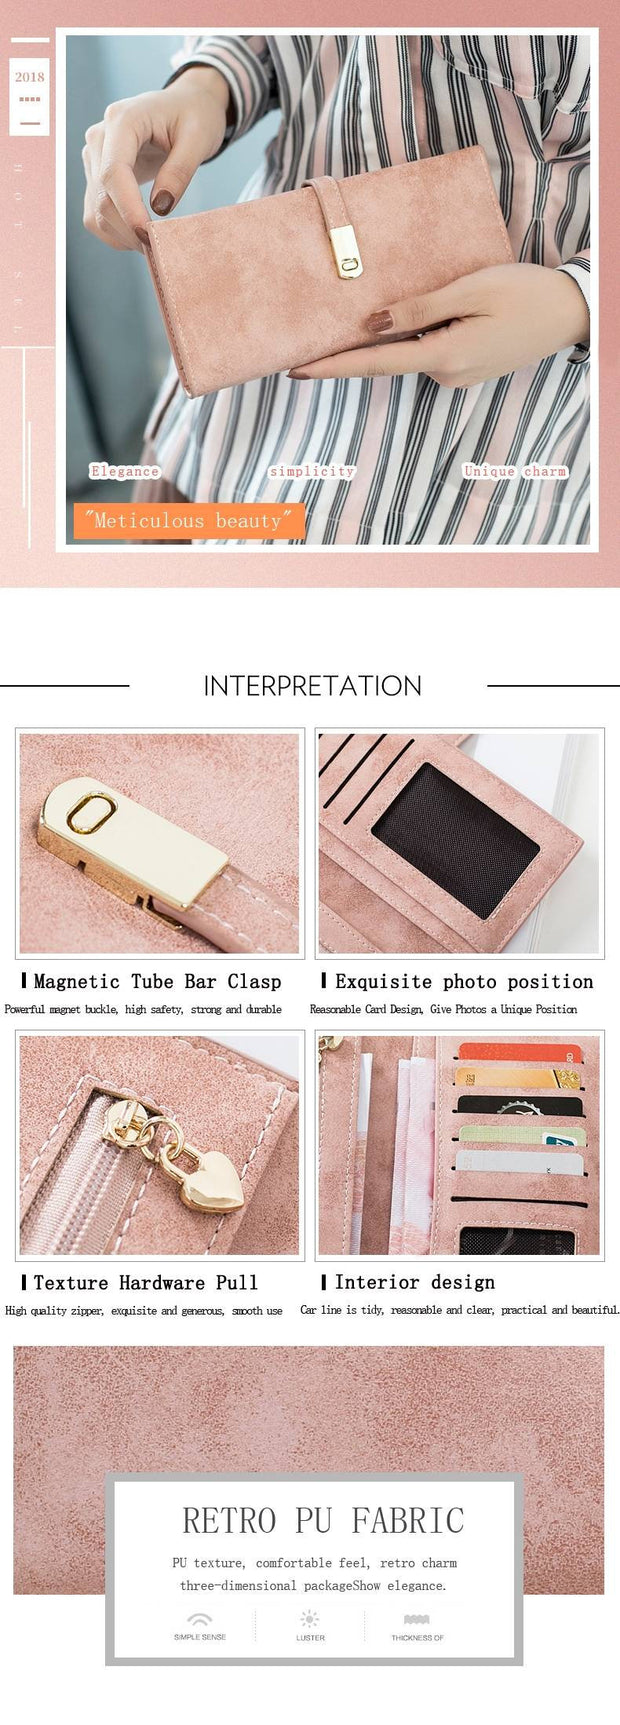 Buy Online Premium Quality and Stylish PU Fabric Thin Women Wallet, Leather Women Purse, Daily Carry Wallet, High-End Wallet, Gift for her, Coin Purse - ShBang.co